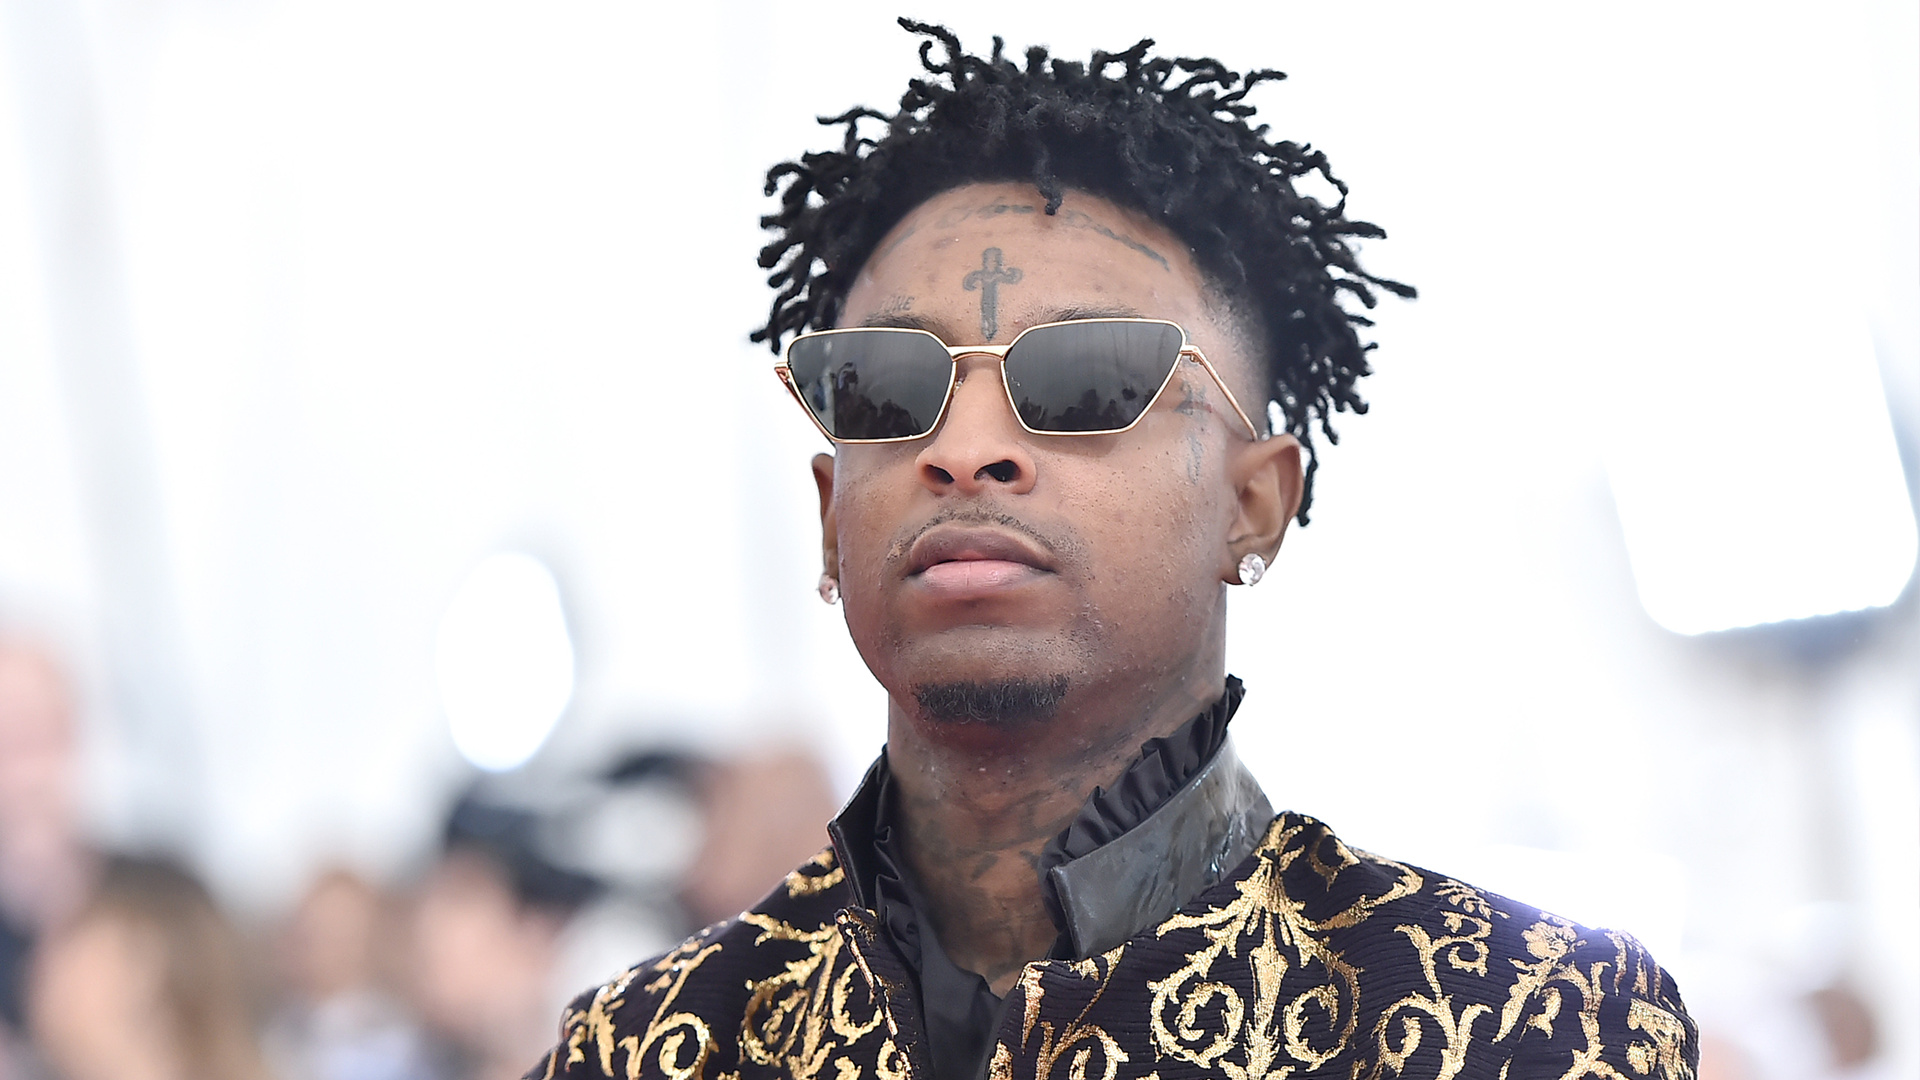 21 Savage, Soundtrack production, Saw reboot, Thrilling music, 1920x1080 Full HD Desktop